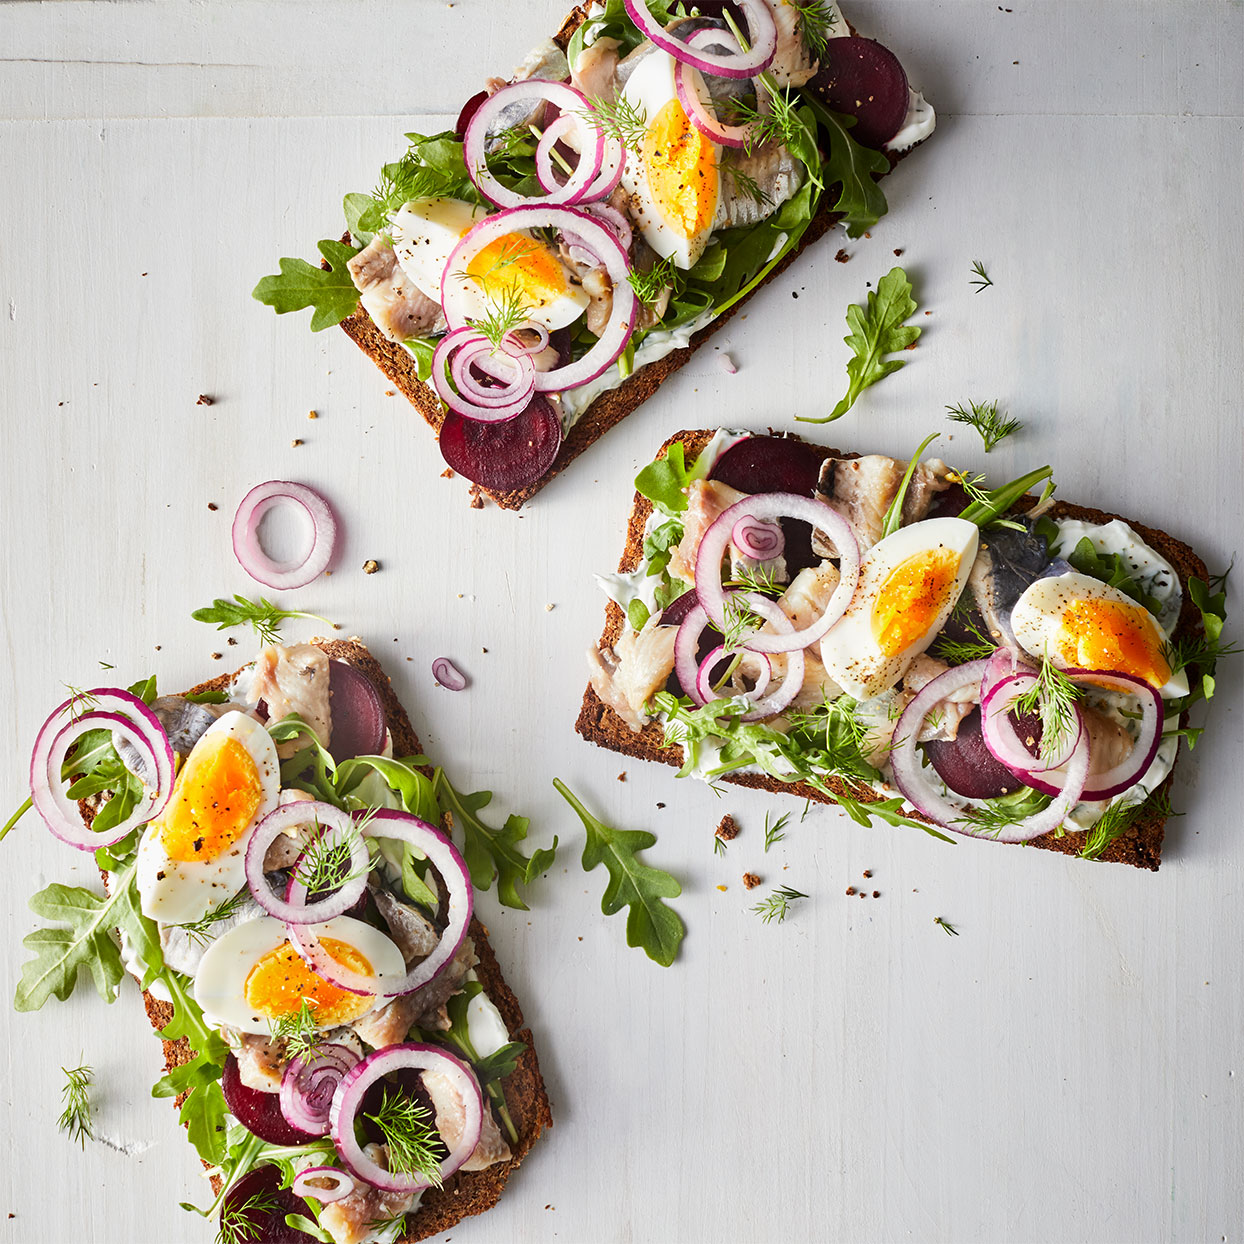 <p>Smoked salmon isn't the only flaky fish made for breakfast breads. This pickled herring arrangement makes a delicious smørrebrød with all the fixings. Or lay the ingredients out on a board and let everyone top their own!</p>
                          